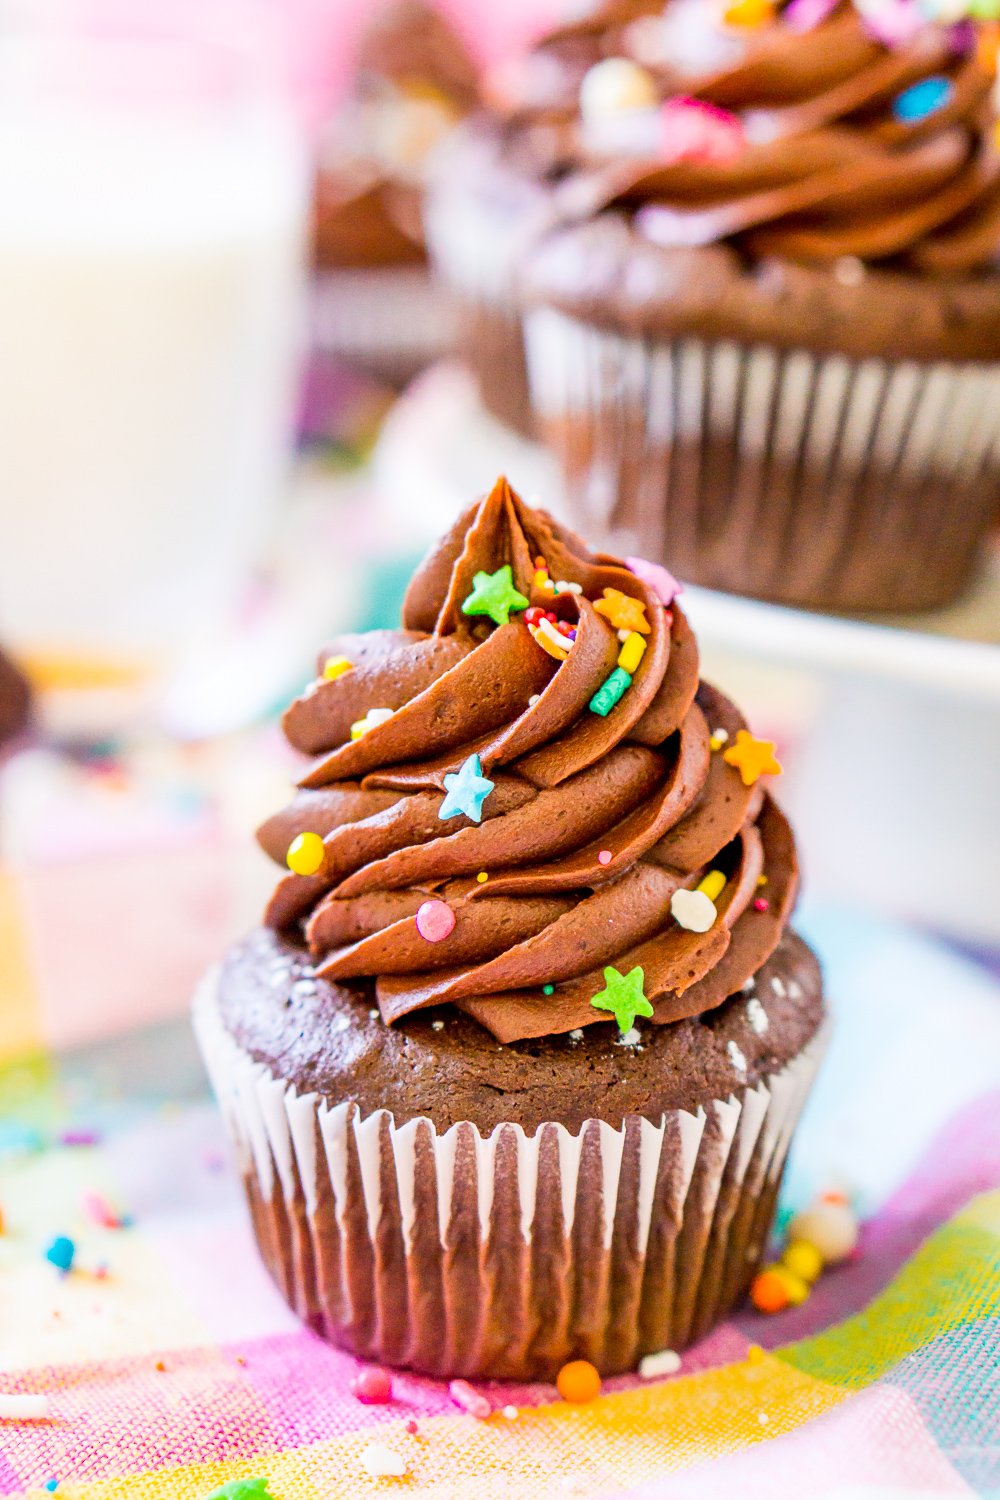 Chocolate Cupcake on colorful napkin with a white cake stand with more chocolate cupcakes in the background.